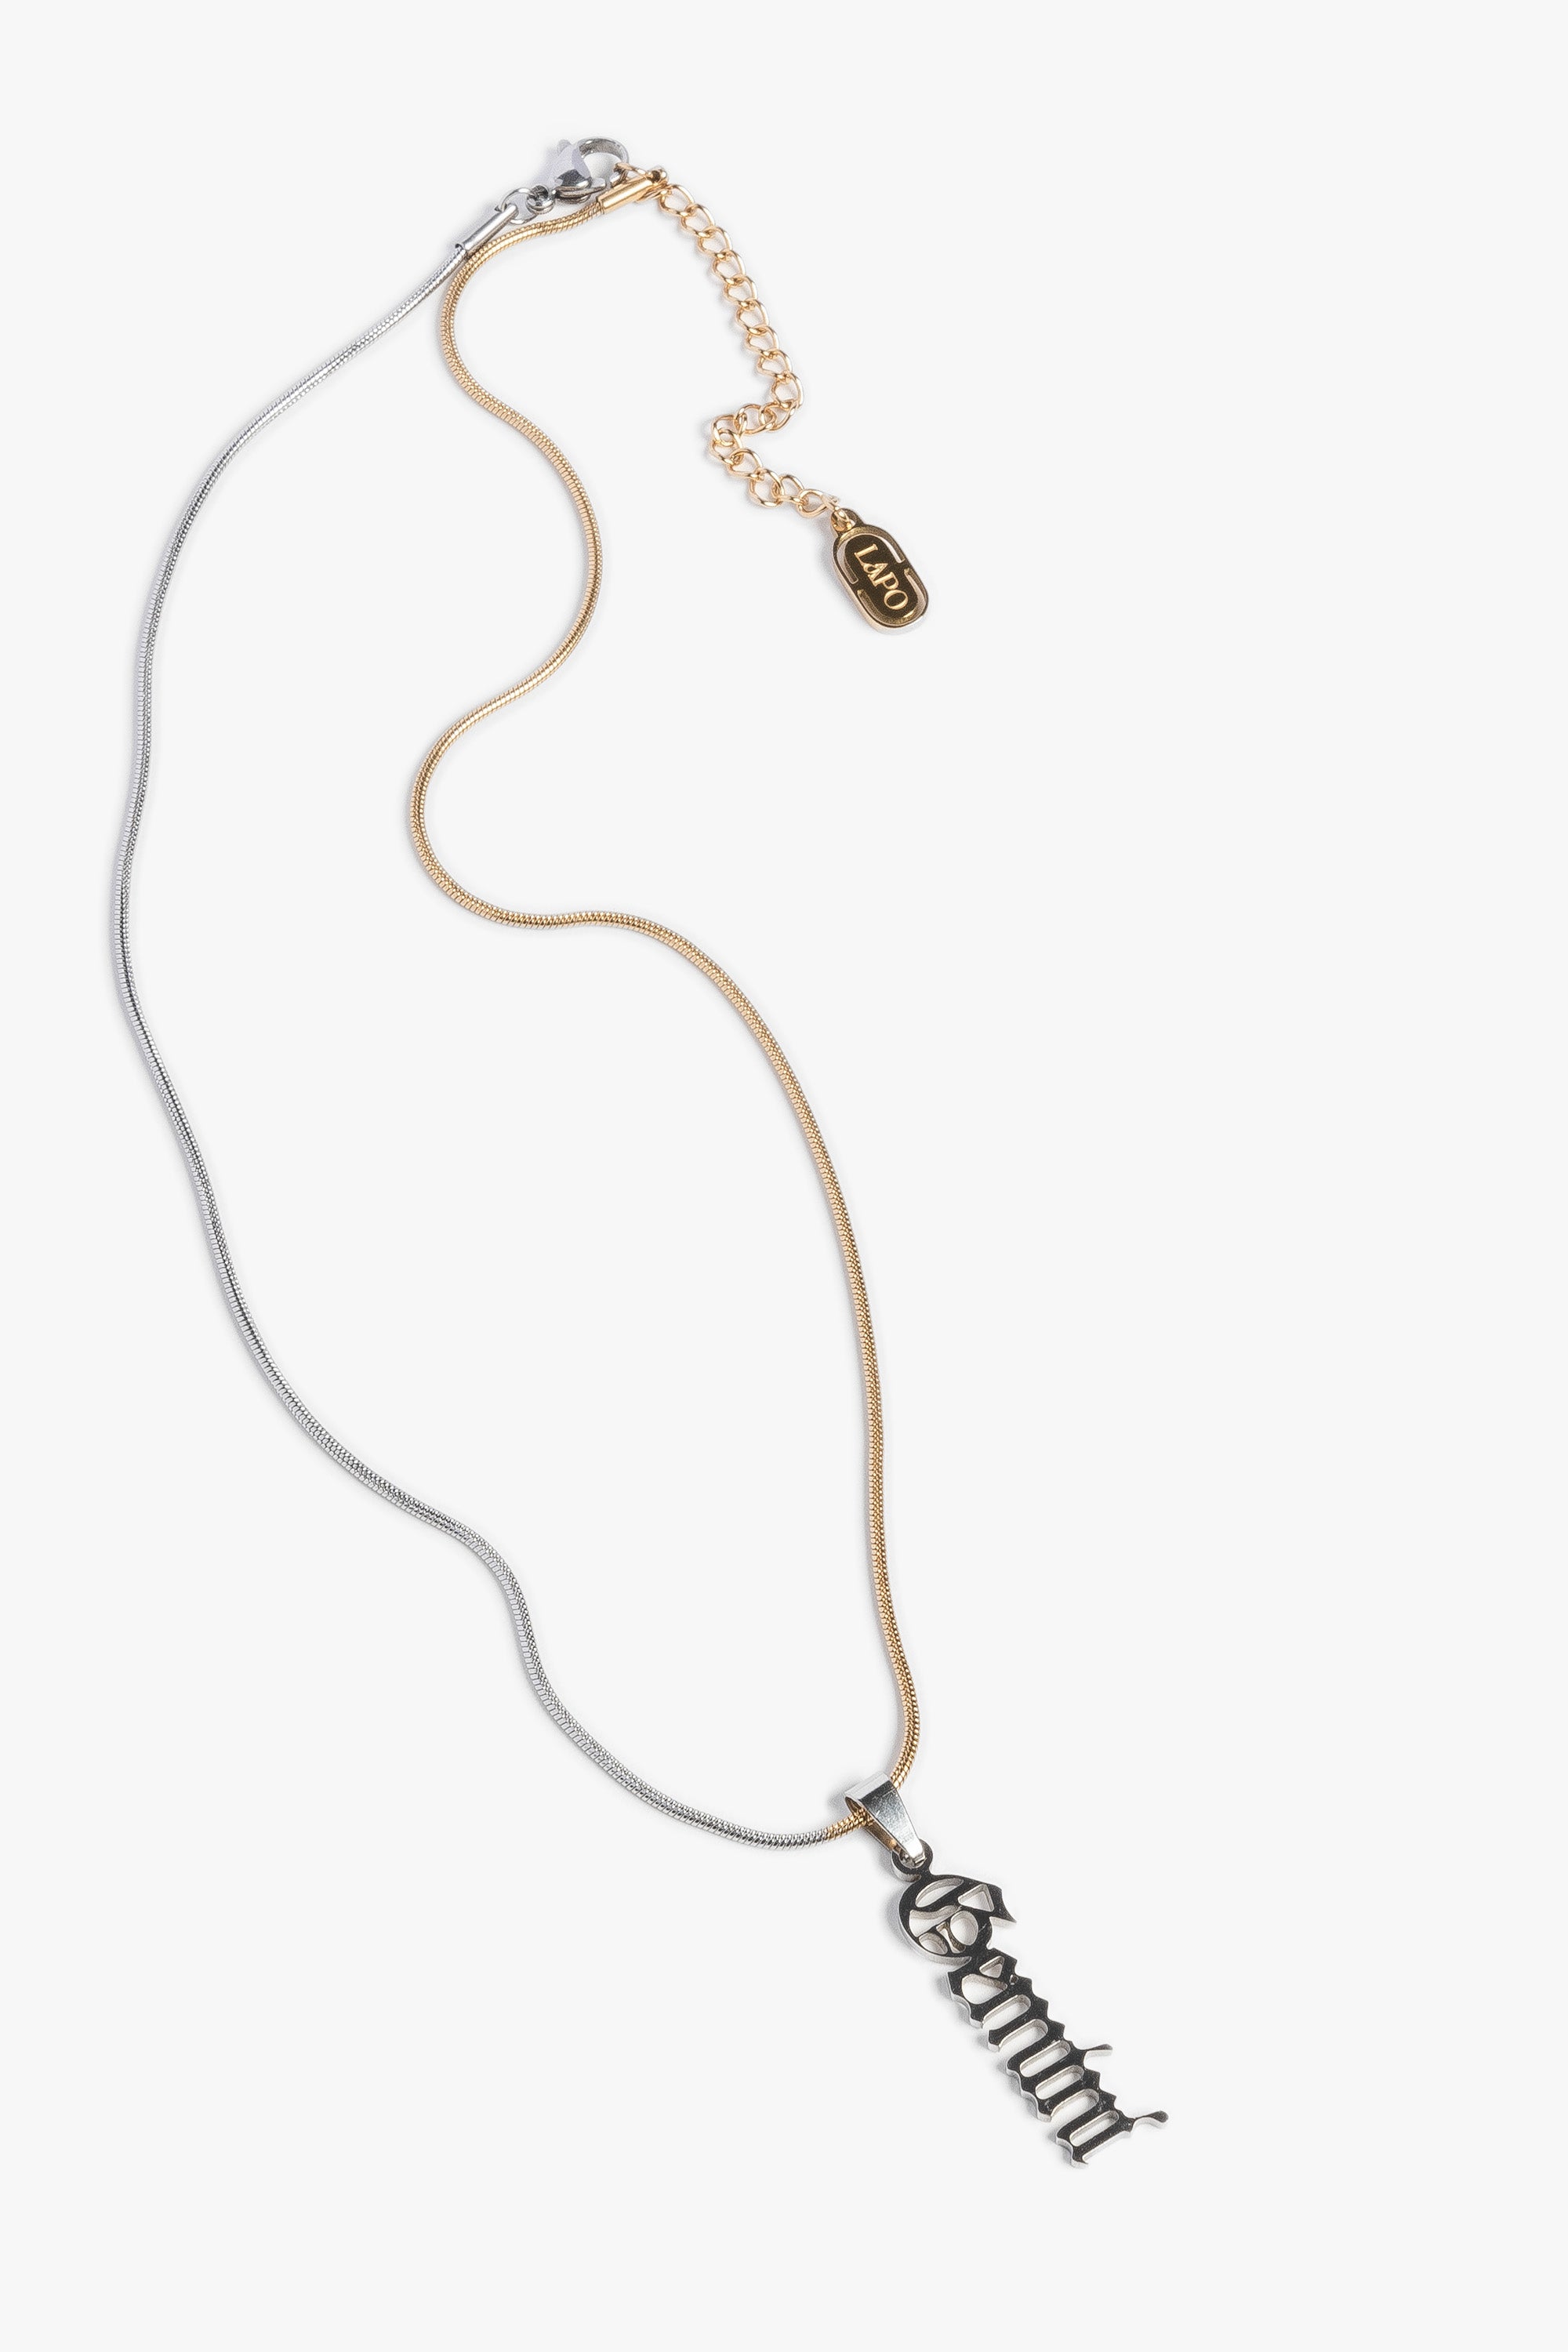 Zodiac Name Necklace with Mixed Metal Snake Chain - Gold